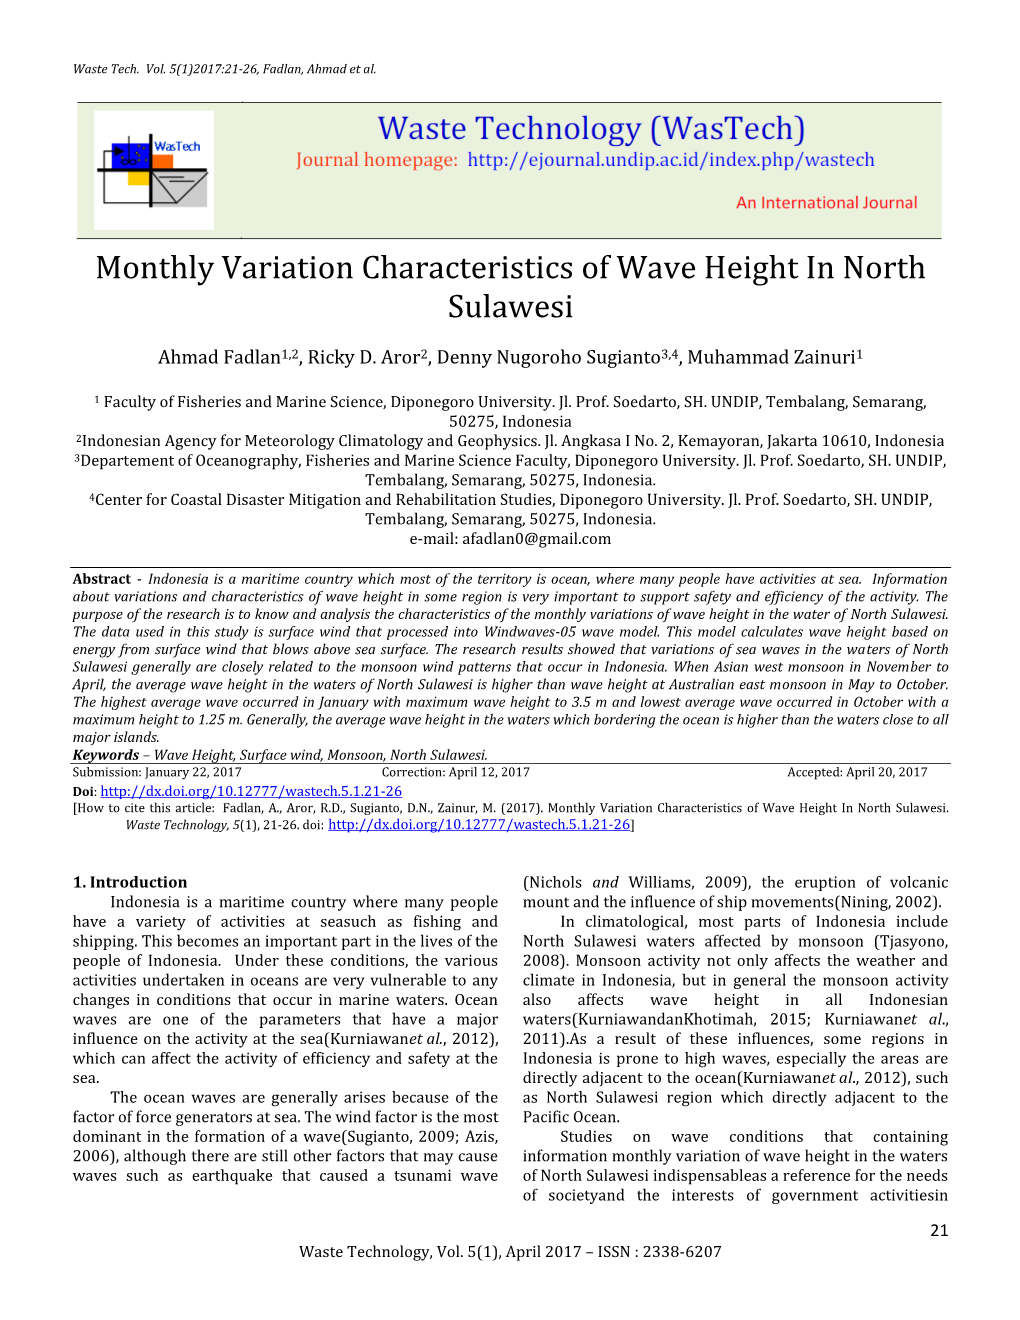 Monthly Variation Characteristics of Wave Height in North Sulawesi